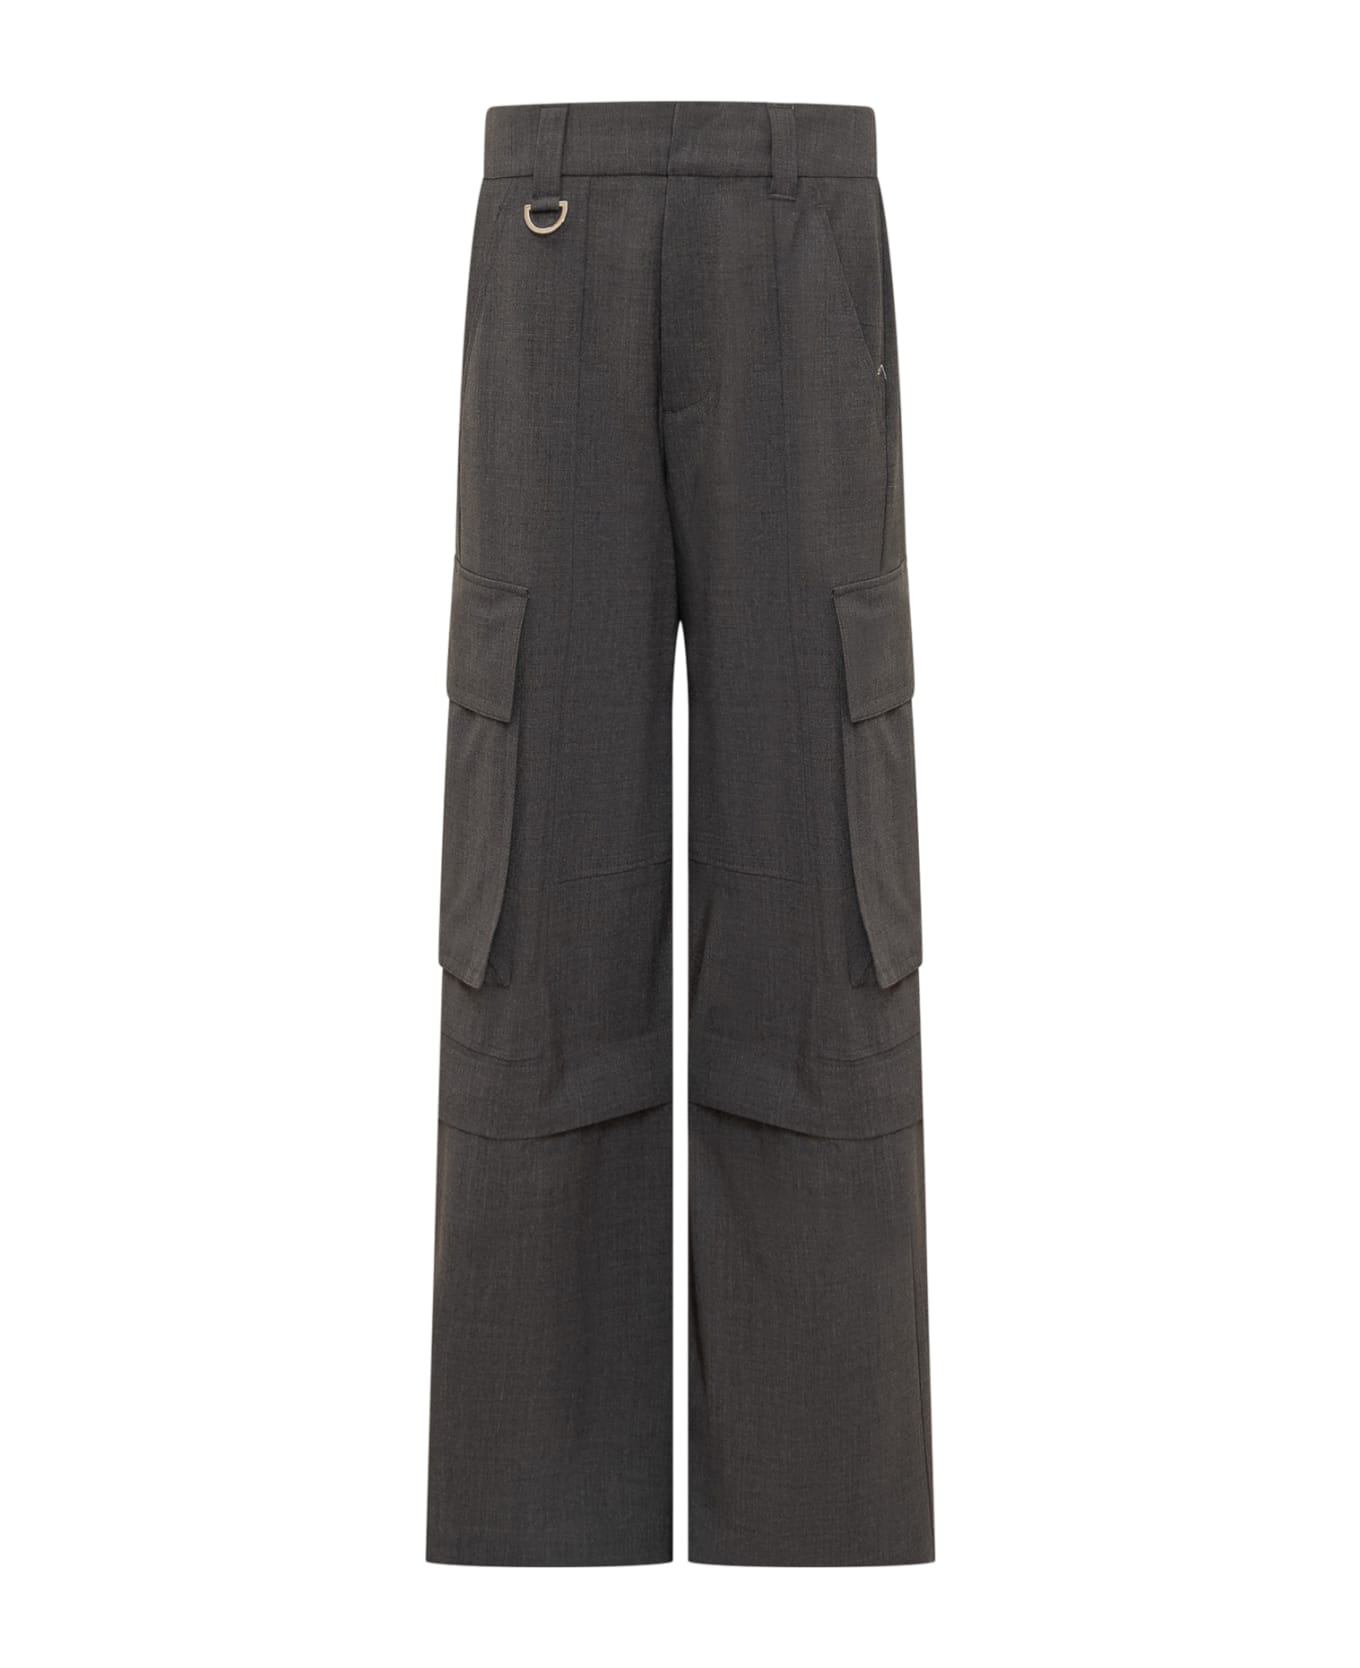 The Seafarer Police Trousers - 7091 ボトムス